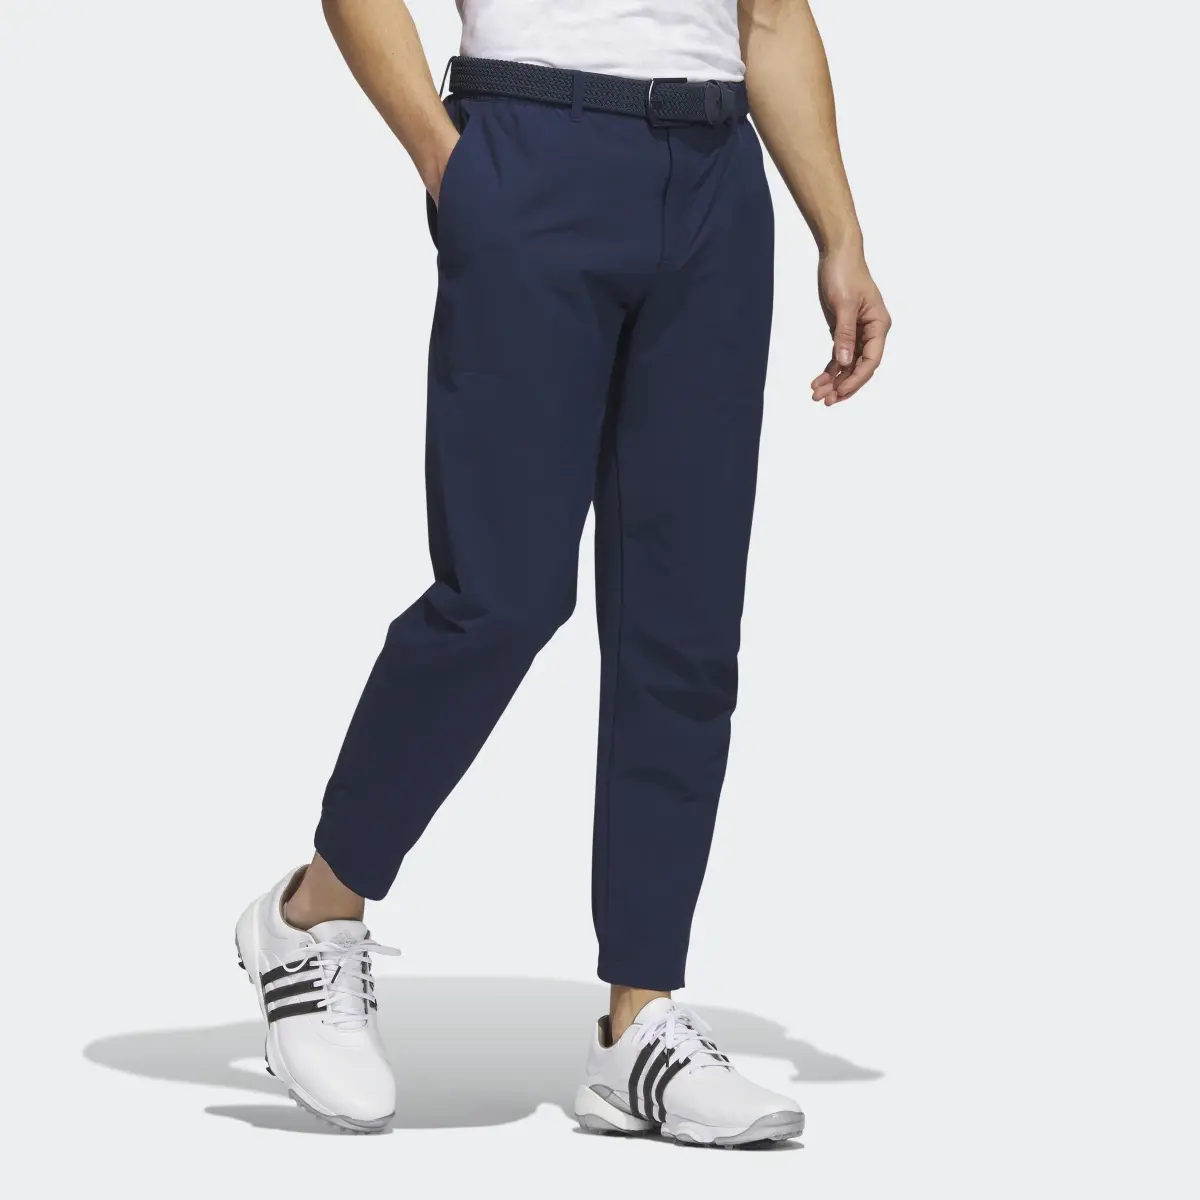 Adidas Go-To Commuter Pants. 3